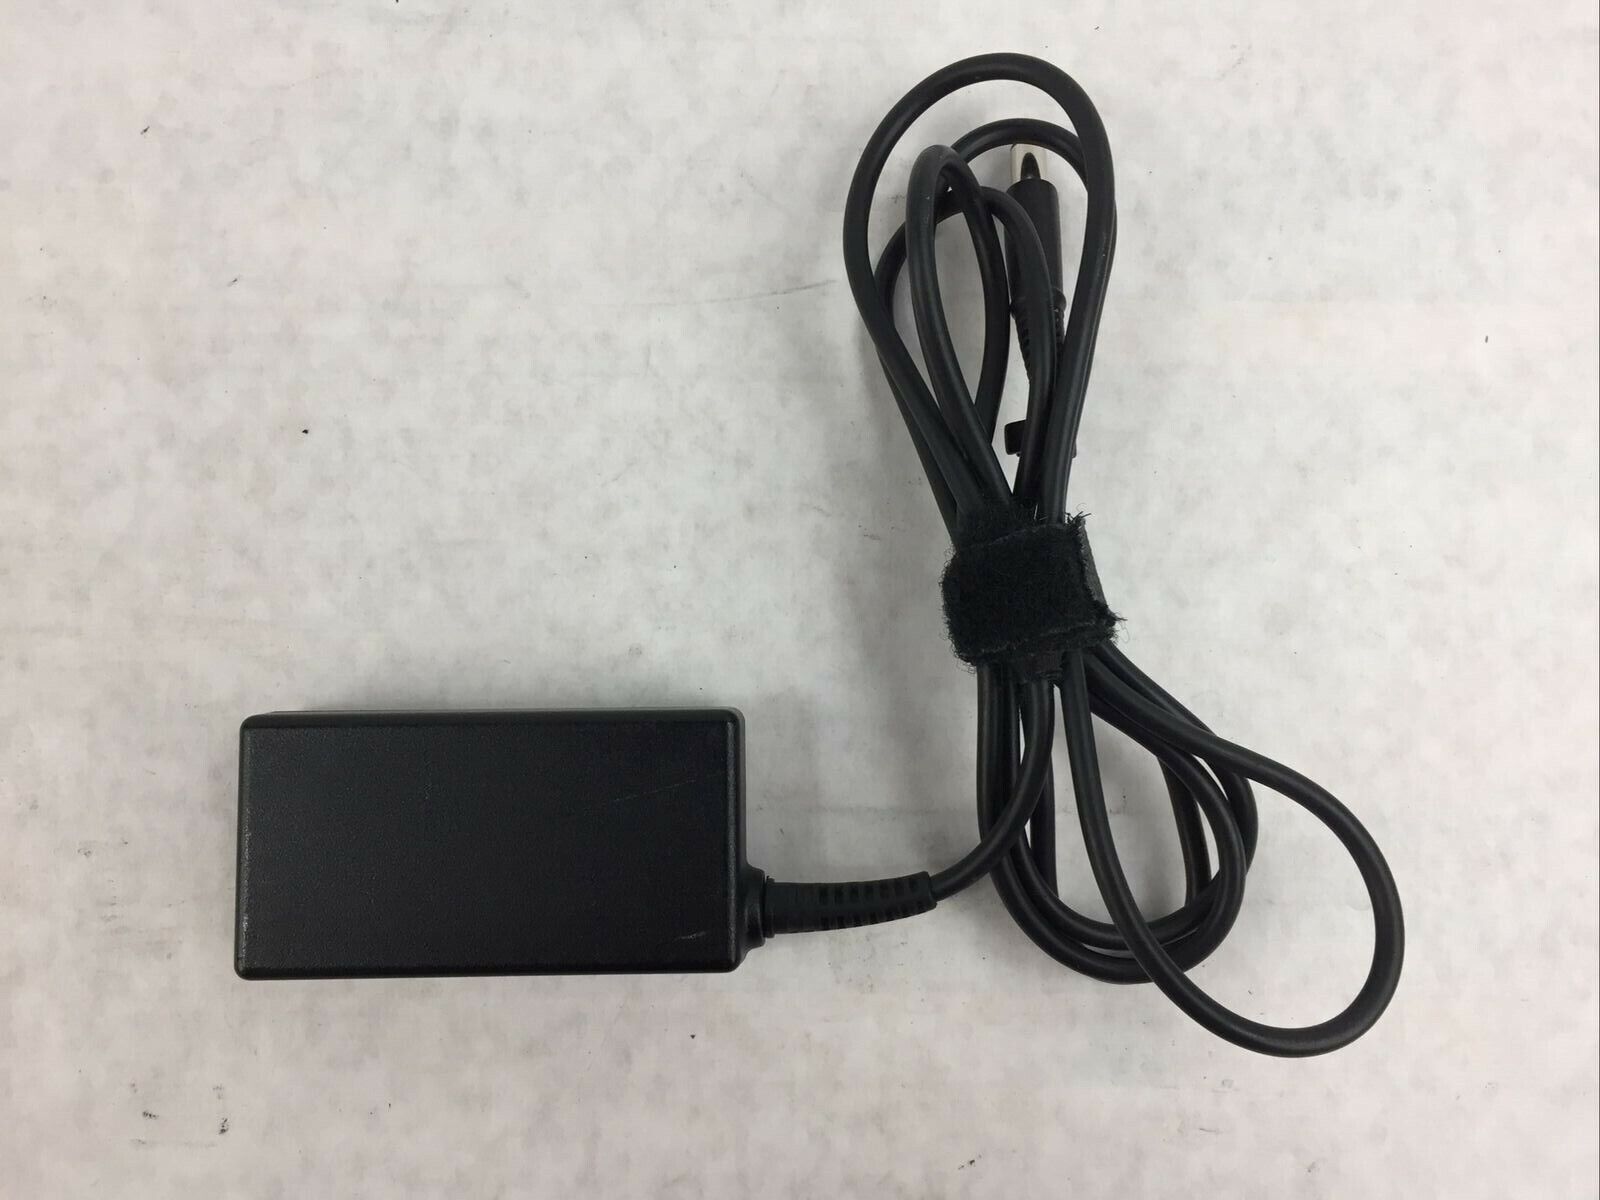 Genuine HP Laptop Charger AC Adapter Power Supply 696607-003 696694-001 45W